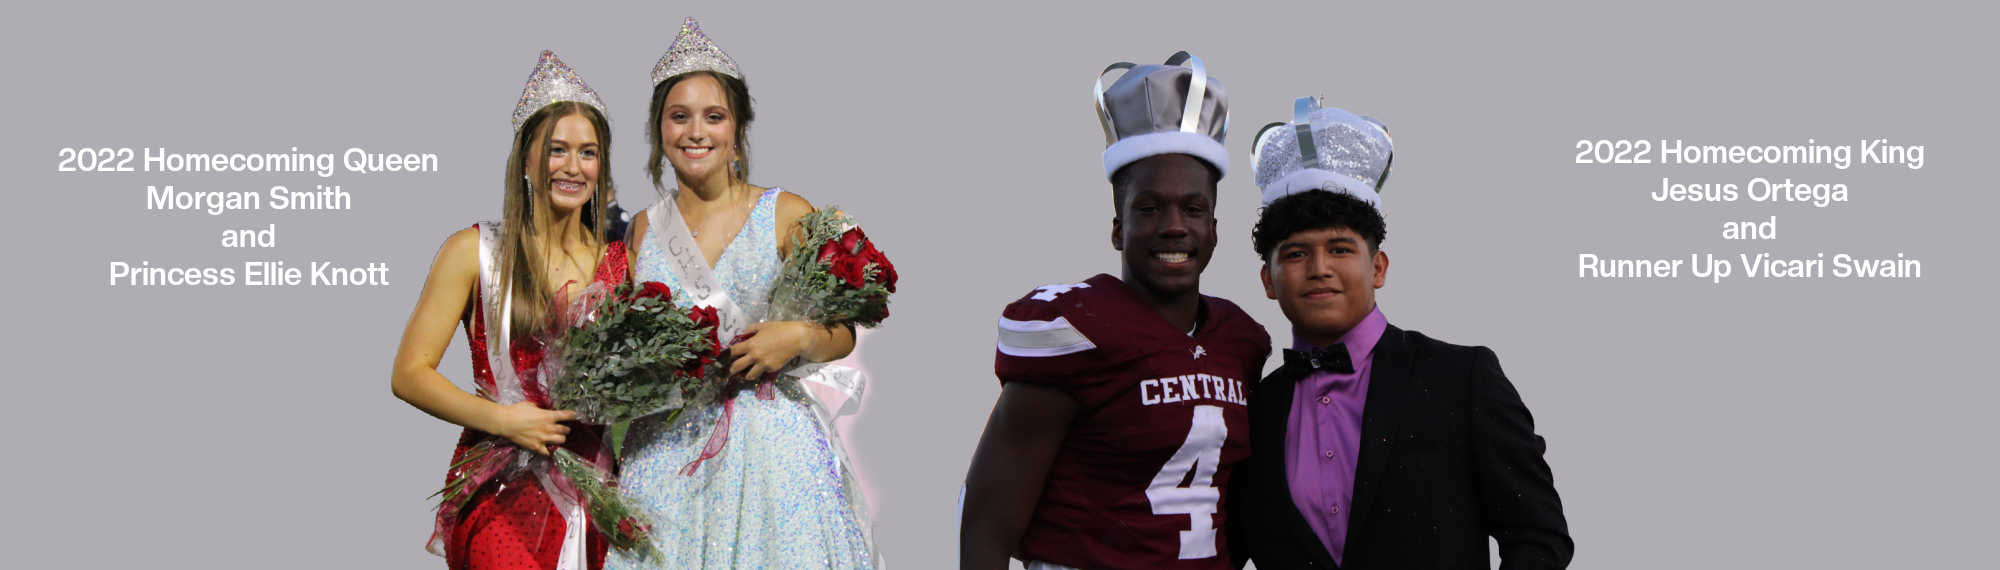 Homecoming Queen and King